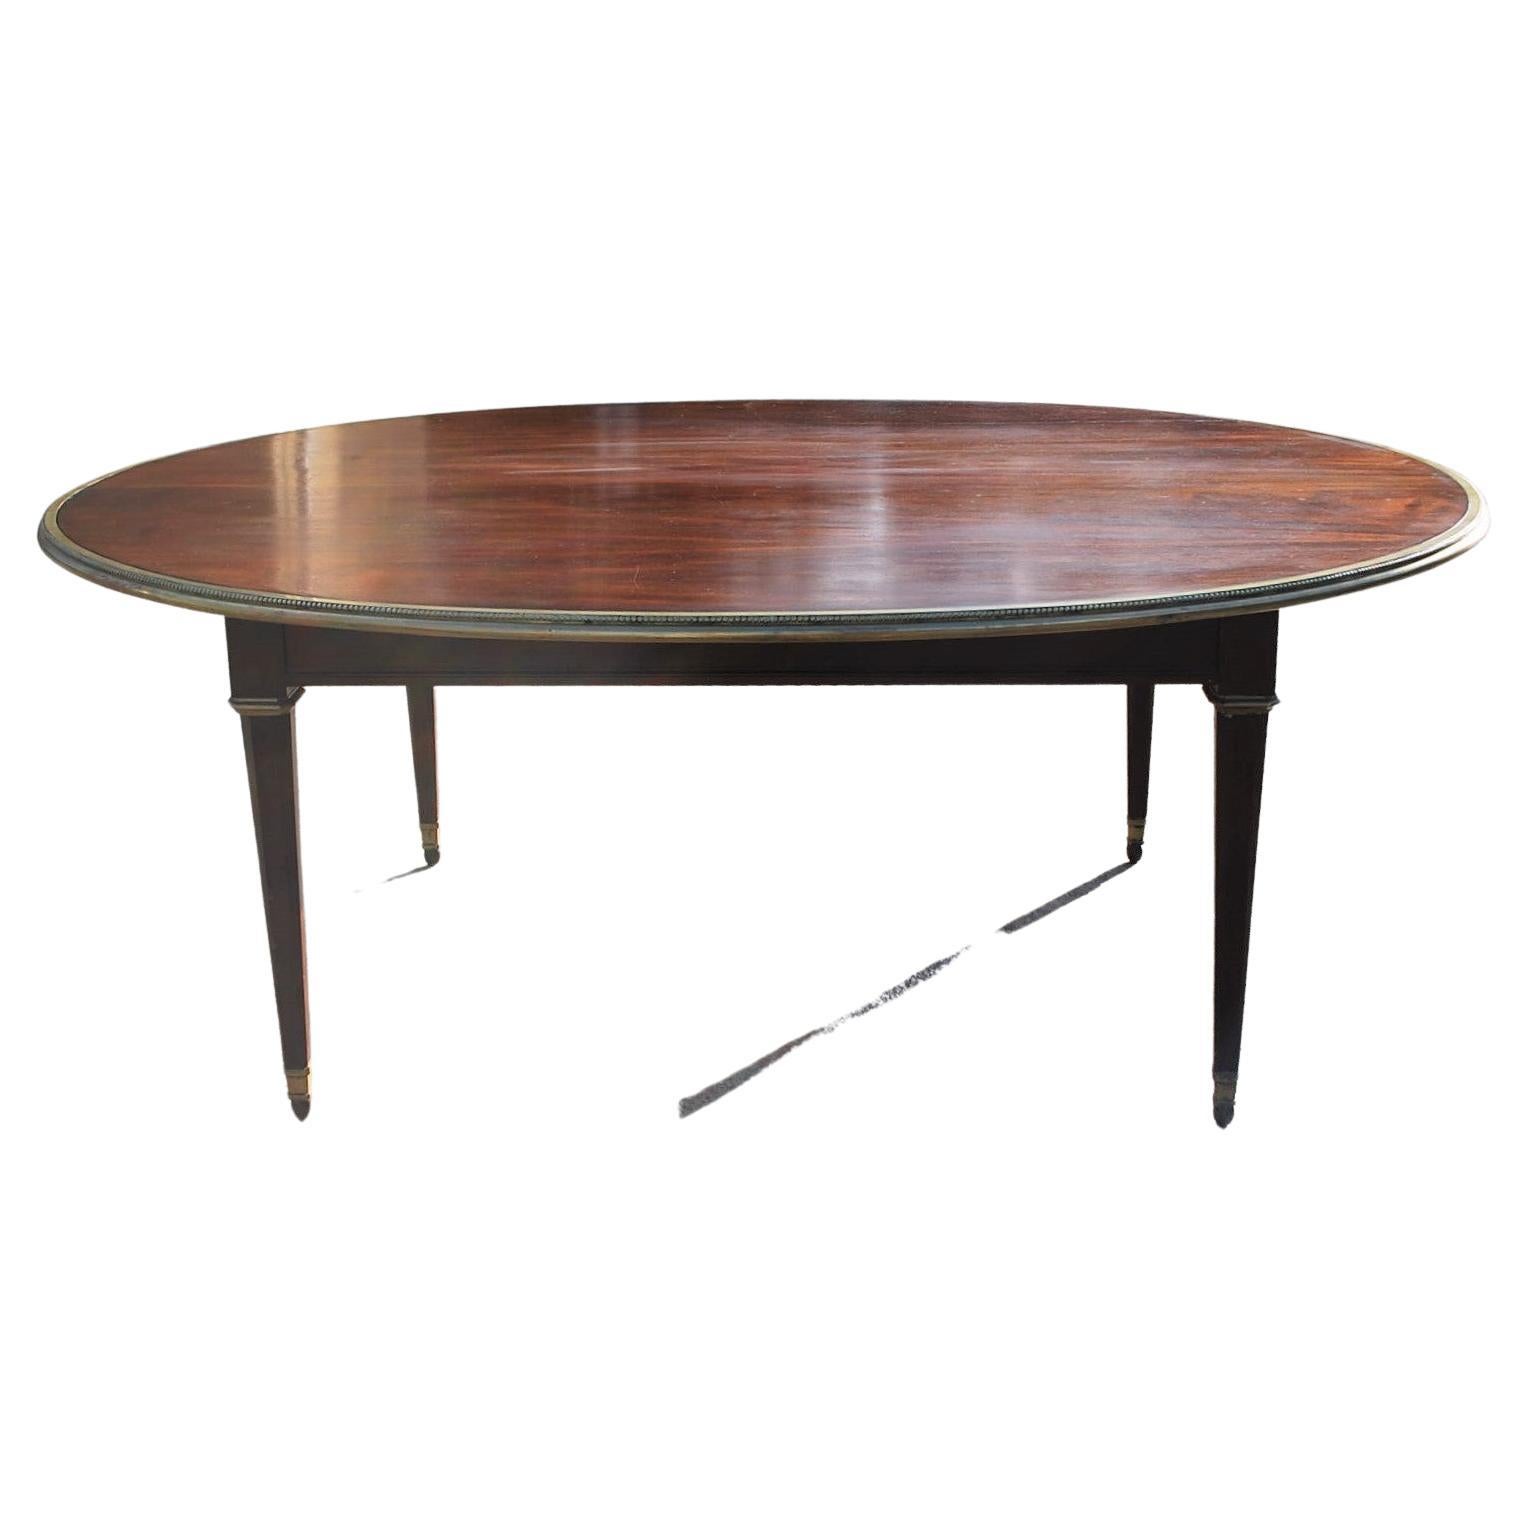 Large Oval Mahogany Dining Table